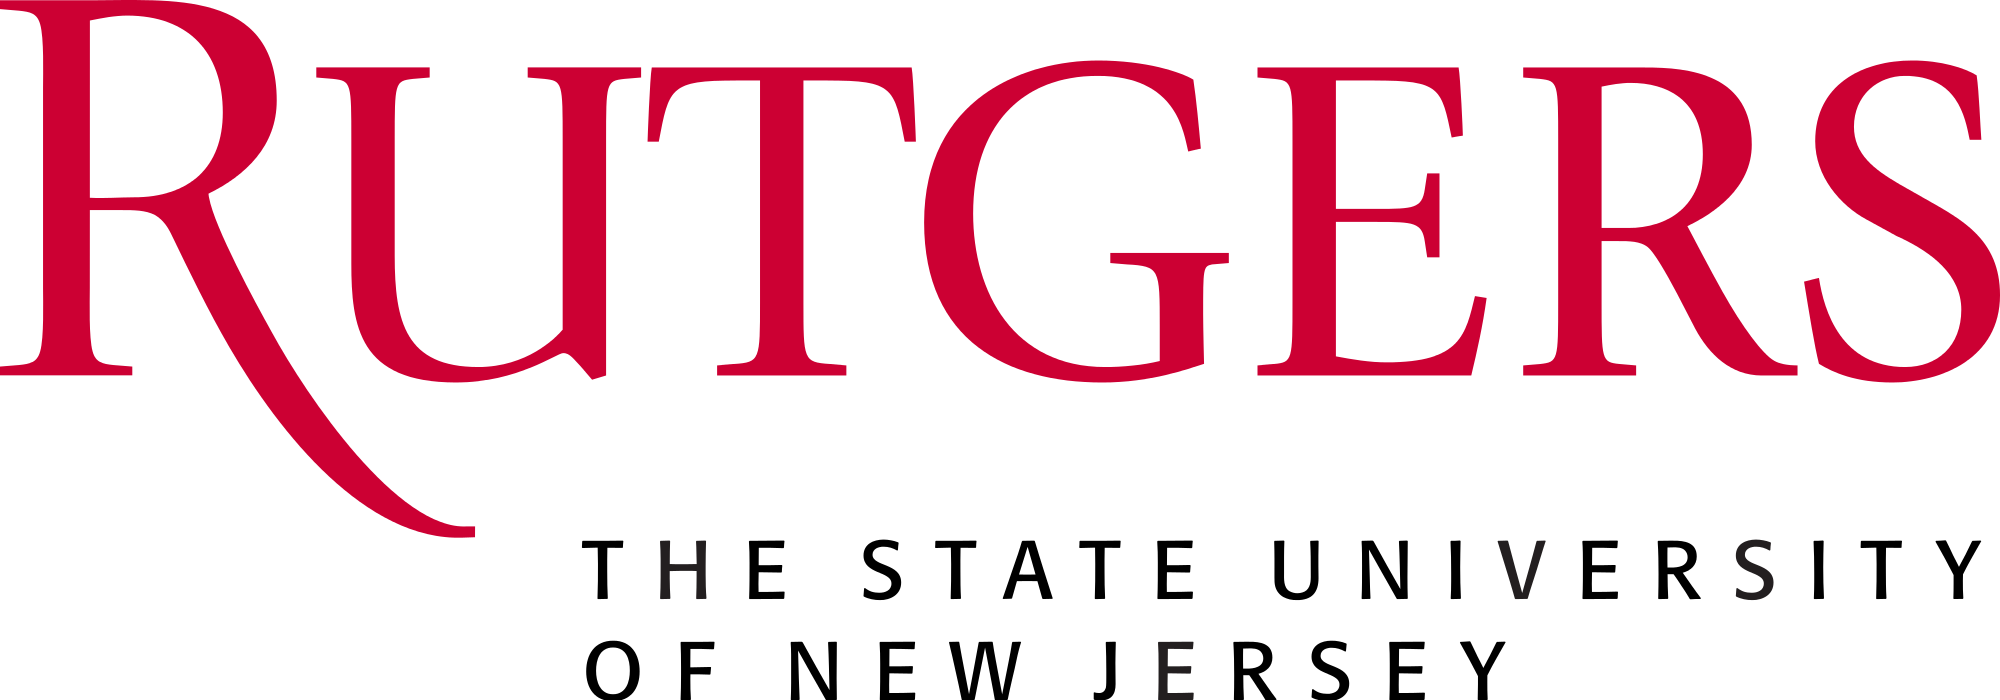 rutgers phd in clinical psychology